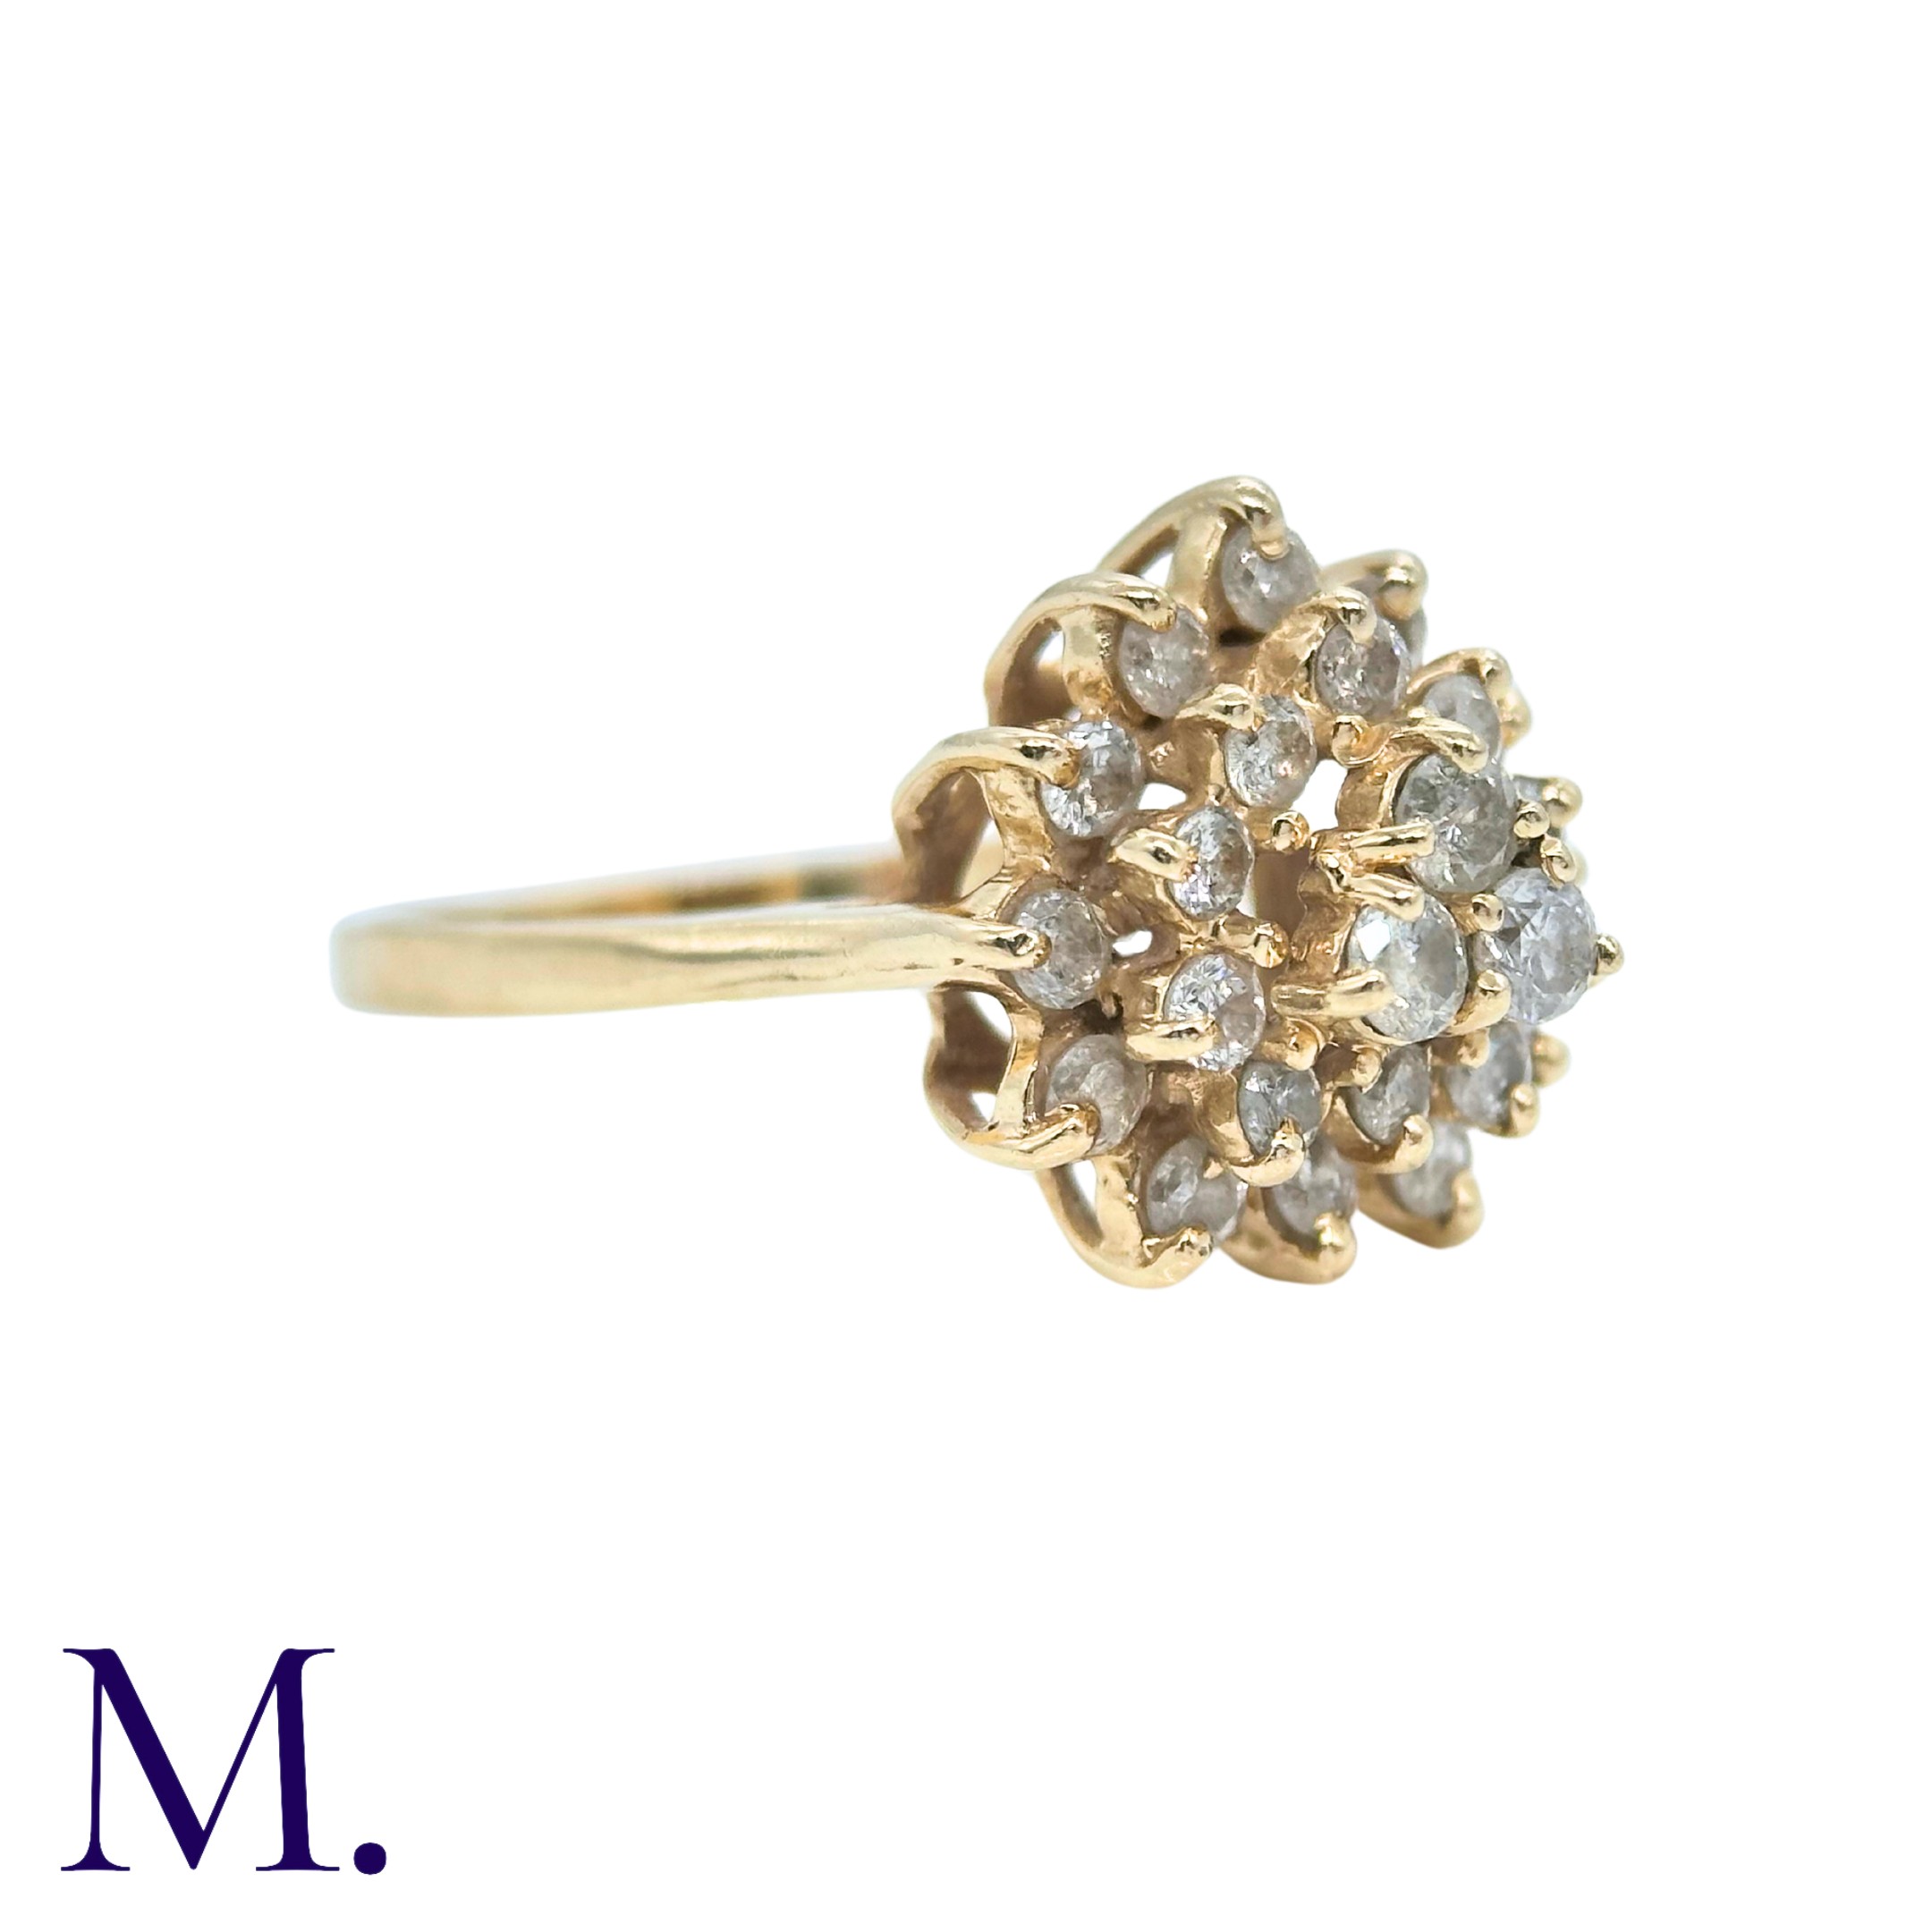 A Diamond Cluster Ring in 14k gold, set with a cluster of round cut diamonds. Stamped 14K, RL. Size: - Image 3 of 3